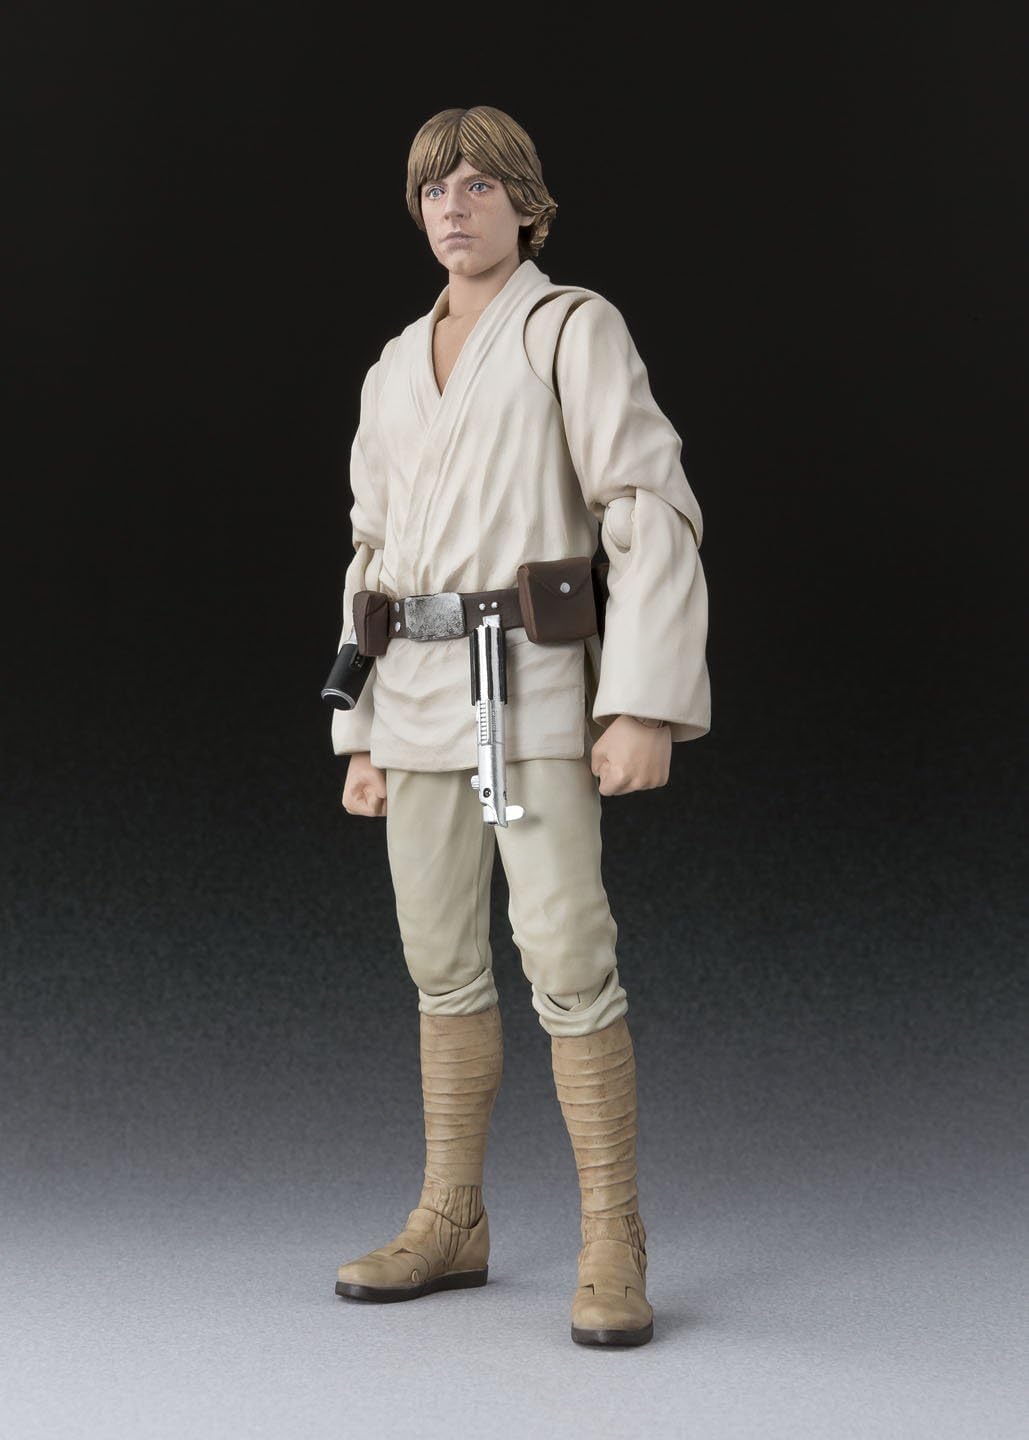 S.H.フィギュアーツ Star Wars: Episode IV A New Hope ルーク・スカイウォーカー（A NEW HOPE）（再販版）約150mm ABS&PVC製 塗装済み可動フィギュア - BanzaiHobby